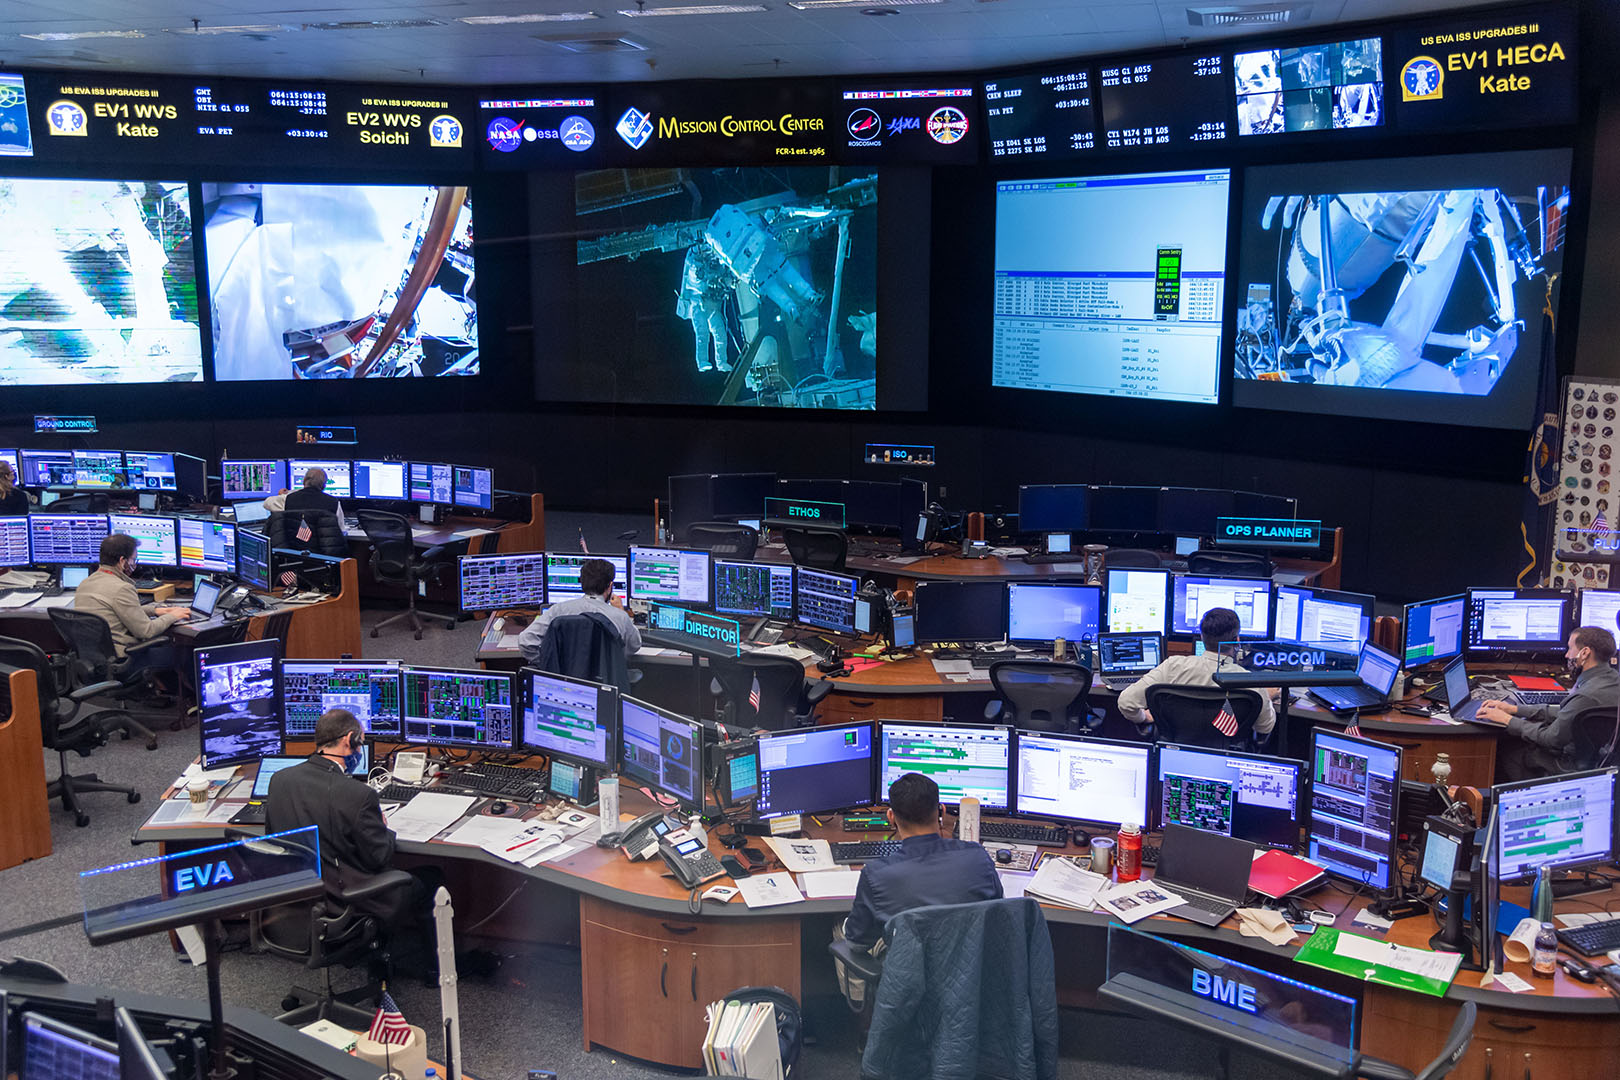 The View From Mission Control